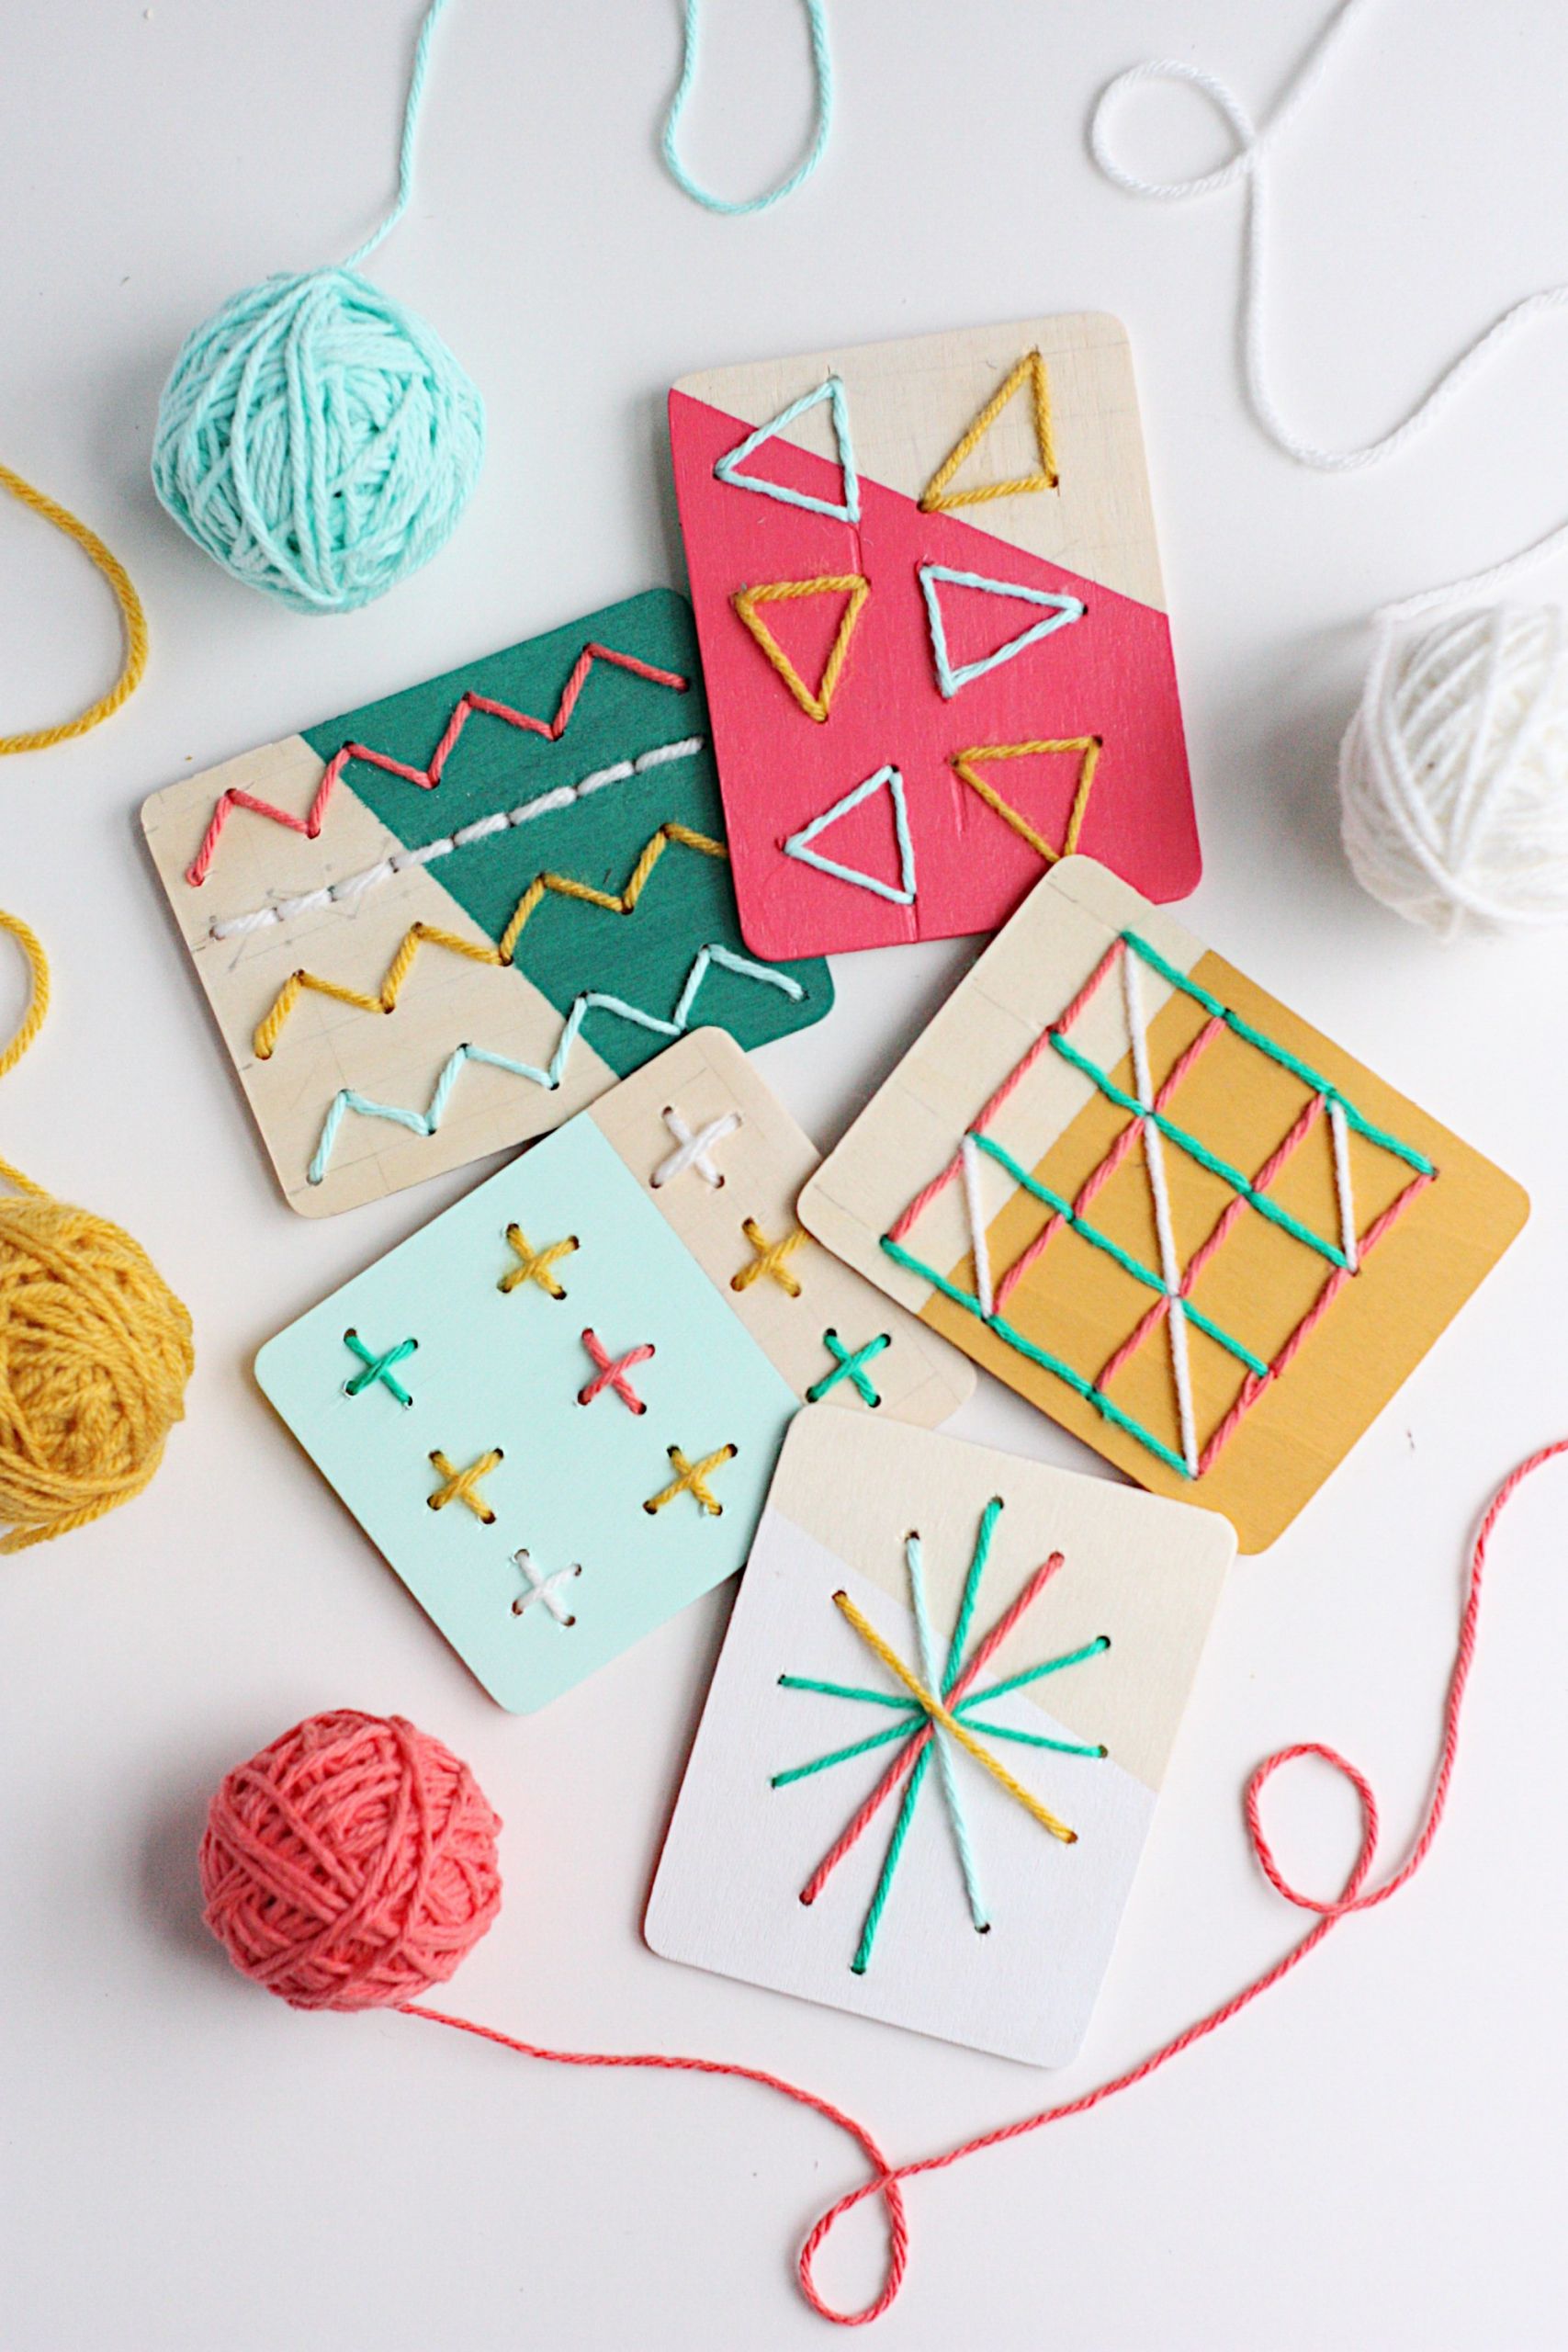 Fun DIY Crafts For Kids
 11 DIY Yarn Crafts That Will Amaze Your Kids Shelterness